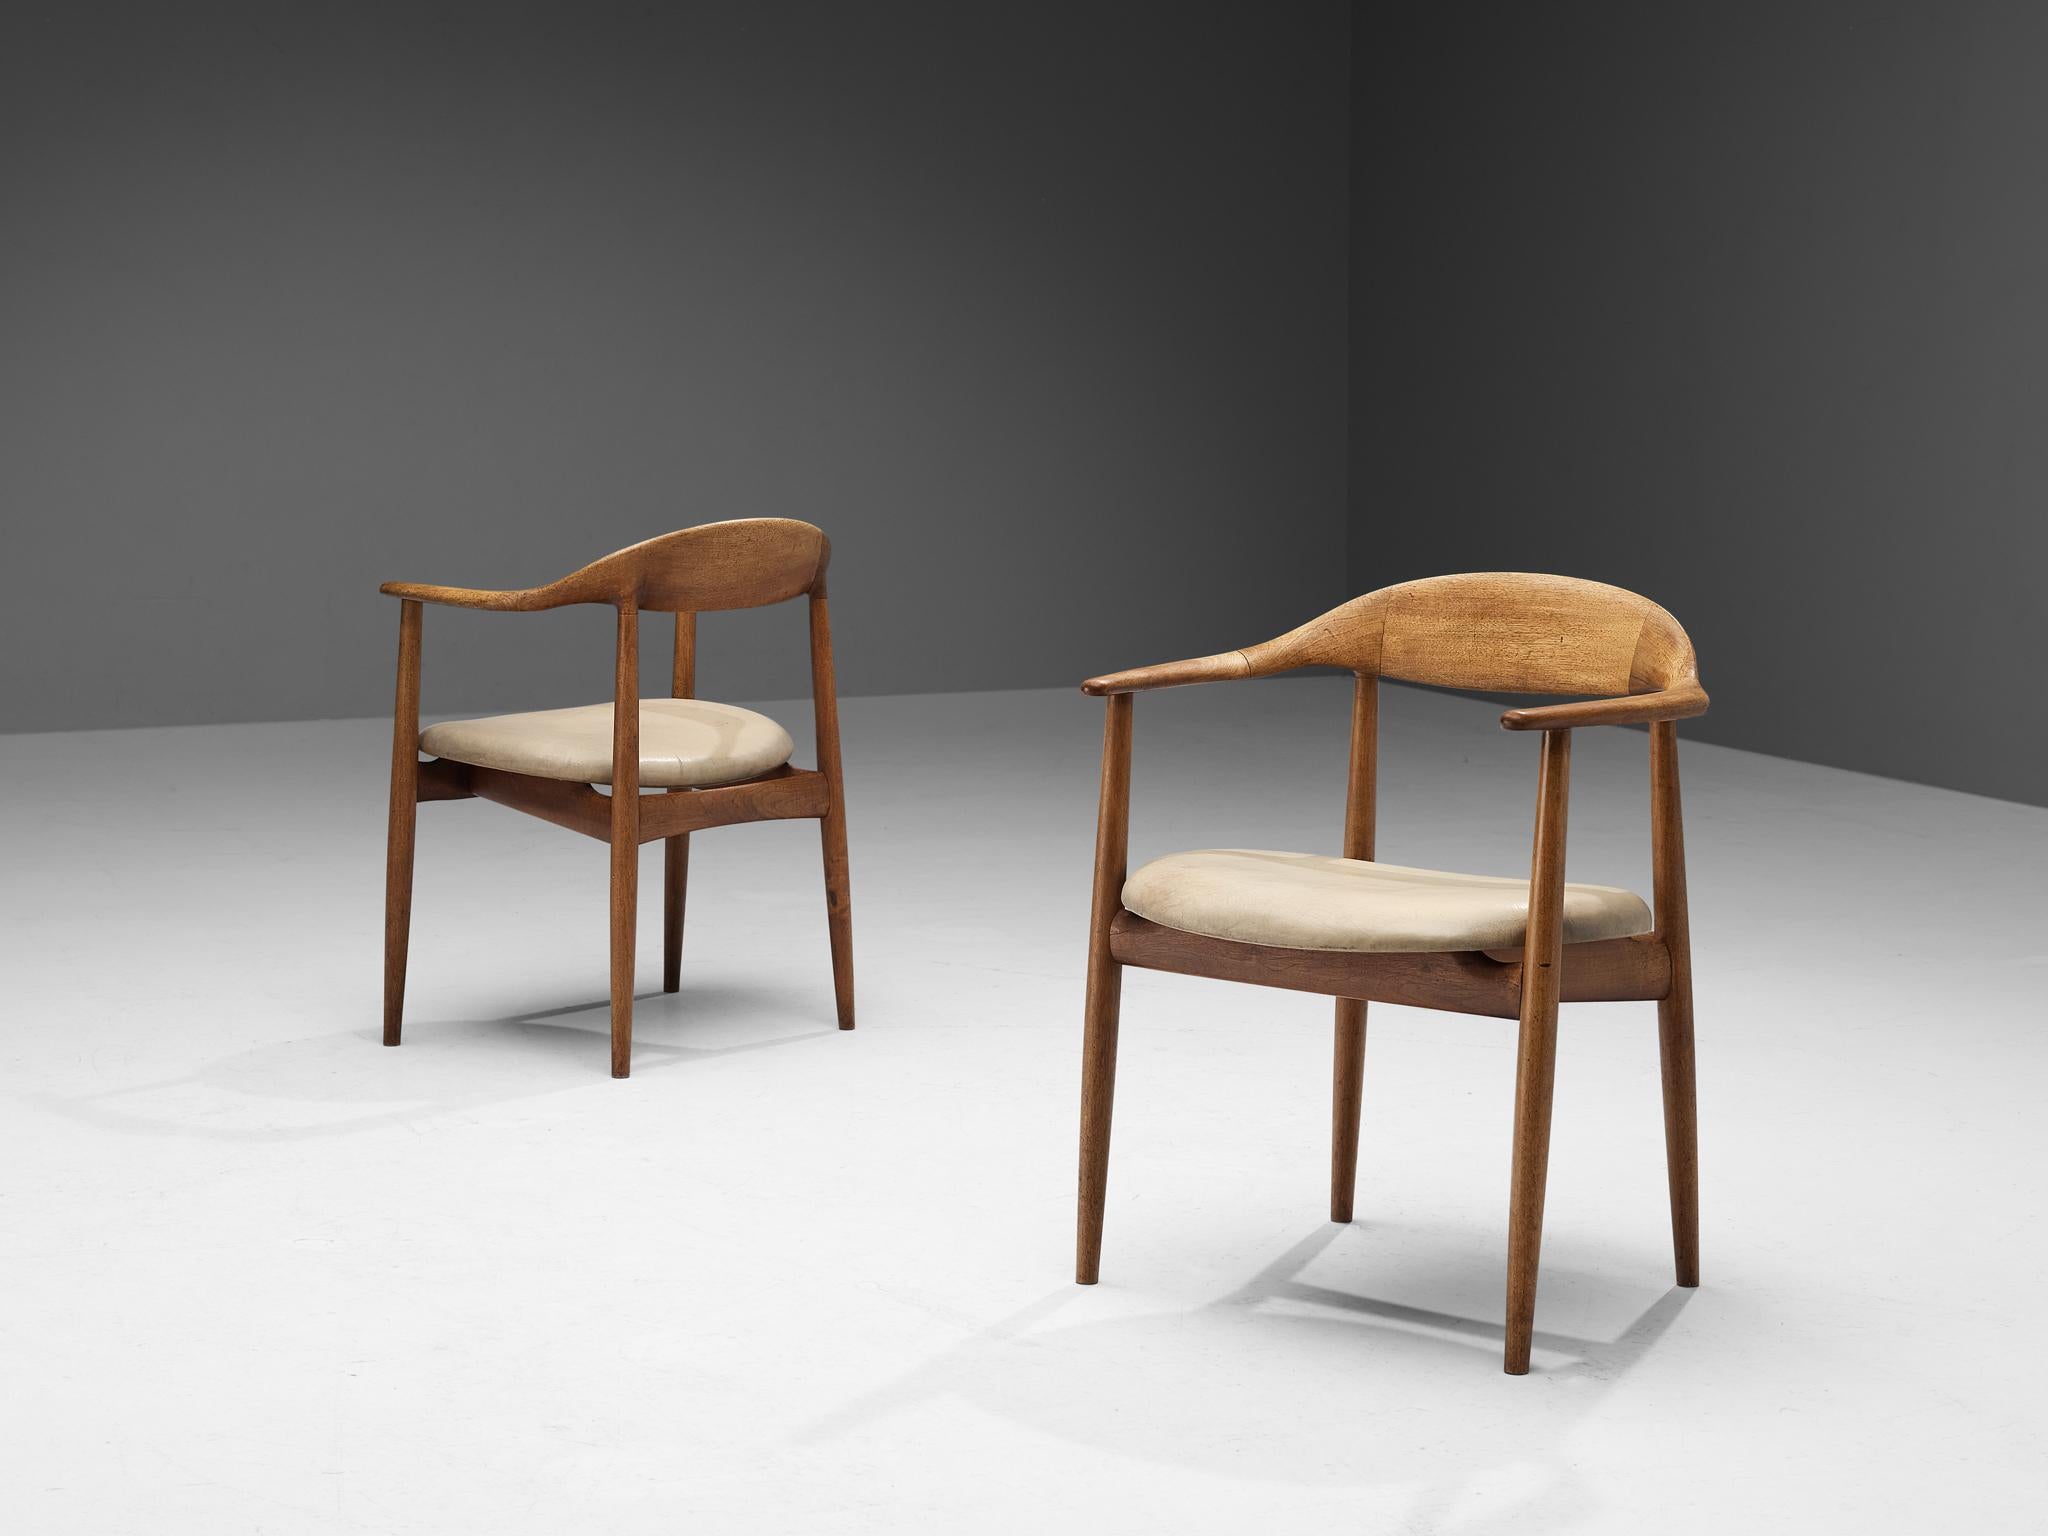 Kurt Østervig for Brande Møbelindustri, pair of armchairs model 27, teak, leather, Denmark, 1950s.

This organic looking pair of armchairs are made with an outstanding attention to detail as seen in the finish of the wood joints. Executed in the